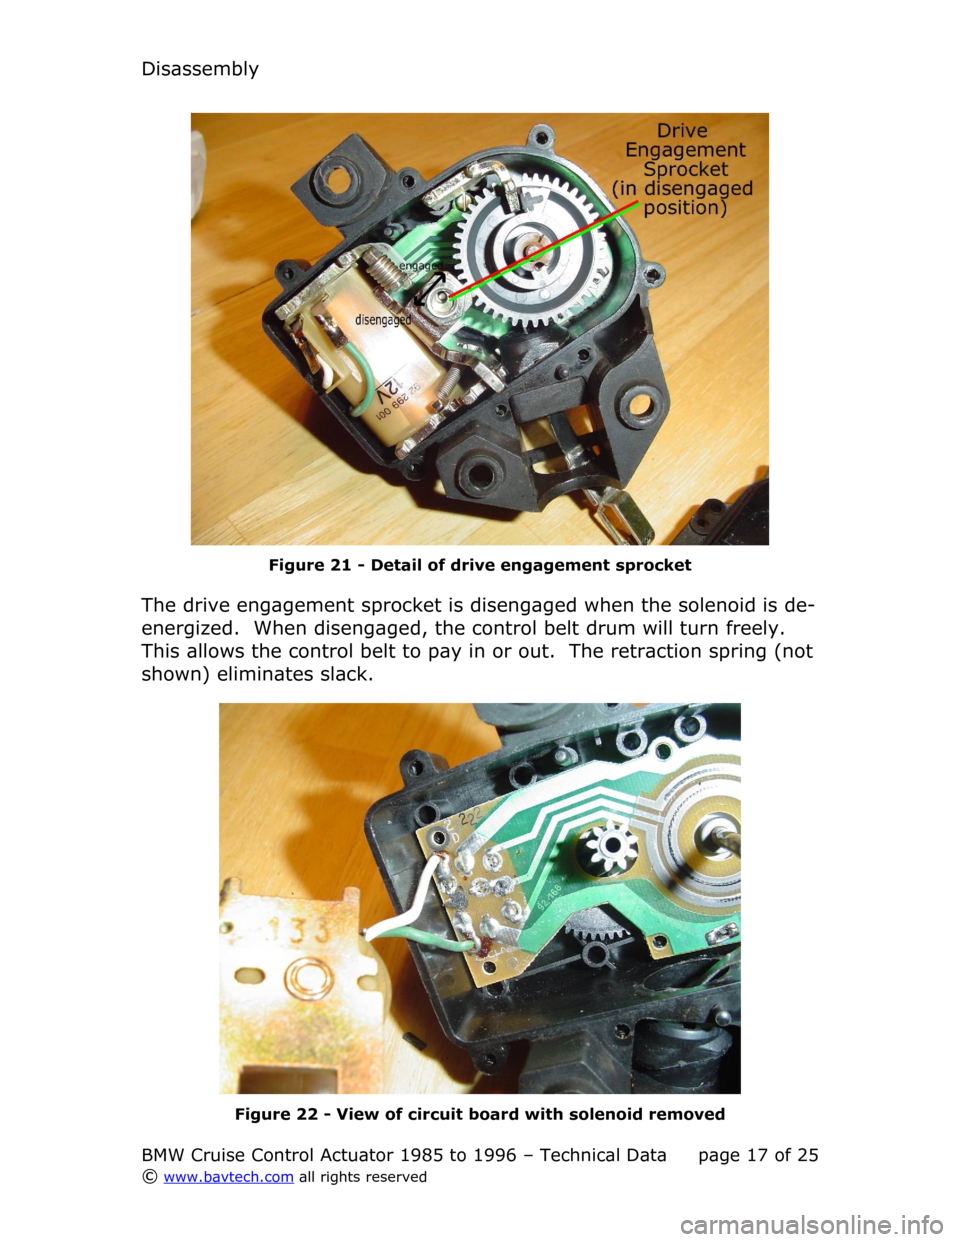 BMW 3 SERIES 1990 E36 Cruise Control Acutator Disassembly
Figure  21  - Detail of drive engagement sprocket
The drive engagement sprocket is disengaged when the solenoid is de-
energized.  When disengaged, the control belt drum will turn freely. 